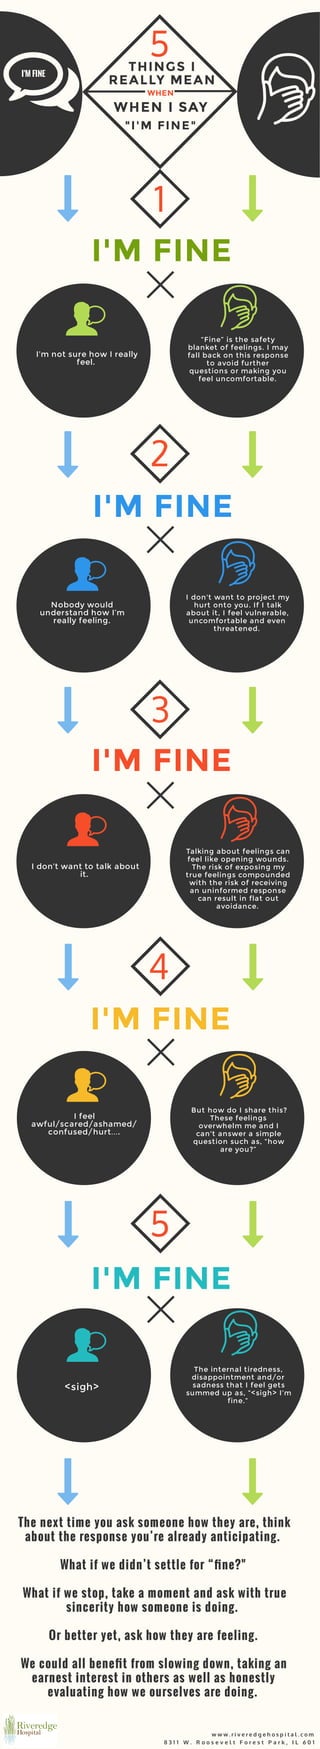 5THINGS I
REALLY MEAN
WHEN I SAY
WHEN
"I'M FINE"
1
I'M FINE
I’m not sure how I really
feel.
“Fine” is the safety
blanket of feelings. I may
fall back on this response
to avoid further
questions or making you
feel uncomfortable.
2
Nobody would
understand how I’m
really feeling.
I don't want to project my
hurt onto you. If I talk
about it, I feel vulnerable,
uncomfortable and even
threatened.
3
I don’t want to talk about
it.
Talking about feelings can
feel like opening wounds.
The risk of exposing my
true feelings compounded
with the risk of receiving
an uninformed response
can result in flat out
avoidance.
4
I feel
awful/scared/ashamed/
confused/hurt….
But how do I share this?
These feelings
overwhelm me and I
can't answer a simple
question such as, “how
are you?”
5
<sigh>
The internal tiredness,
disappointment and/or
sadness that I feel gets
summed up as, “<sigh> I’m
fine.”
The next time you ask someone how they are, think
about the response you’re already anticipating.
What if we didn’t settle for “ ne?"
What if we stop, take a moment and ask with true
sincerity how someone is doing.
Or better yet, ask how they are feeling.
We could all bene t from slowing down, taking an
earnest interest in others as well as honestly
evaluating how we ourselves are doing.
I'M FINE
I'M FINE
I'M FINE
I'M FINE
I'M FINE
8 3 1 1 W . R o o s e v e l t F o r e s t P a r k , I L 6 0 1 3
w w w . r i v e r e d g e h o s p i t a l . c o m
 